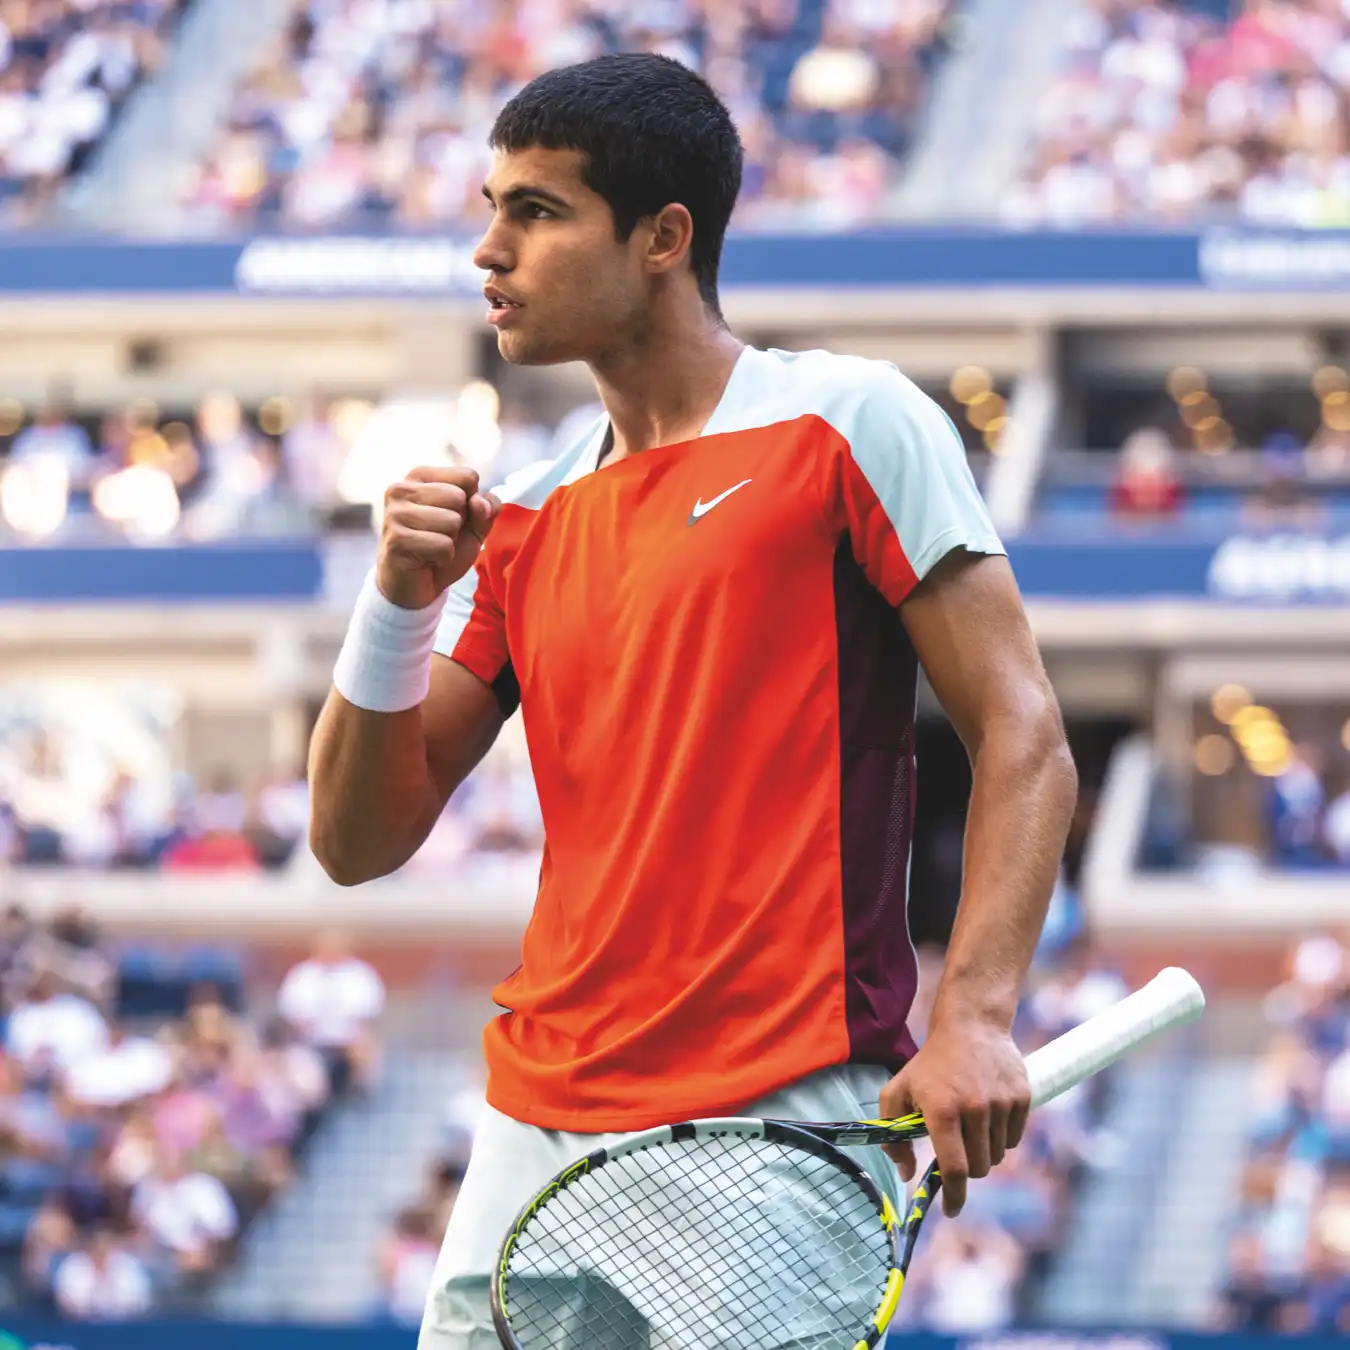 Among its other tennis Testimonees, Rolex counts a host of fellow US Open winners